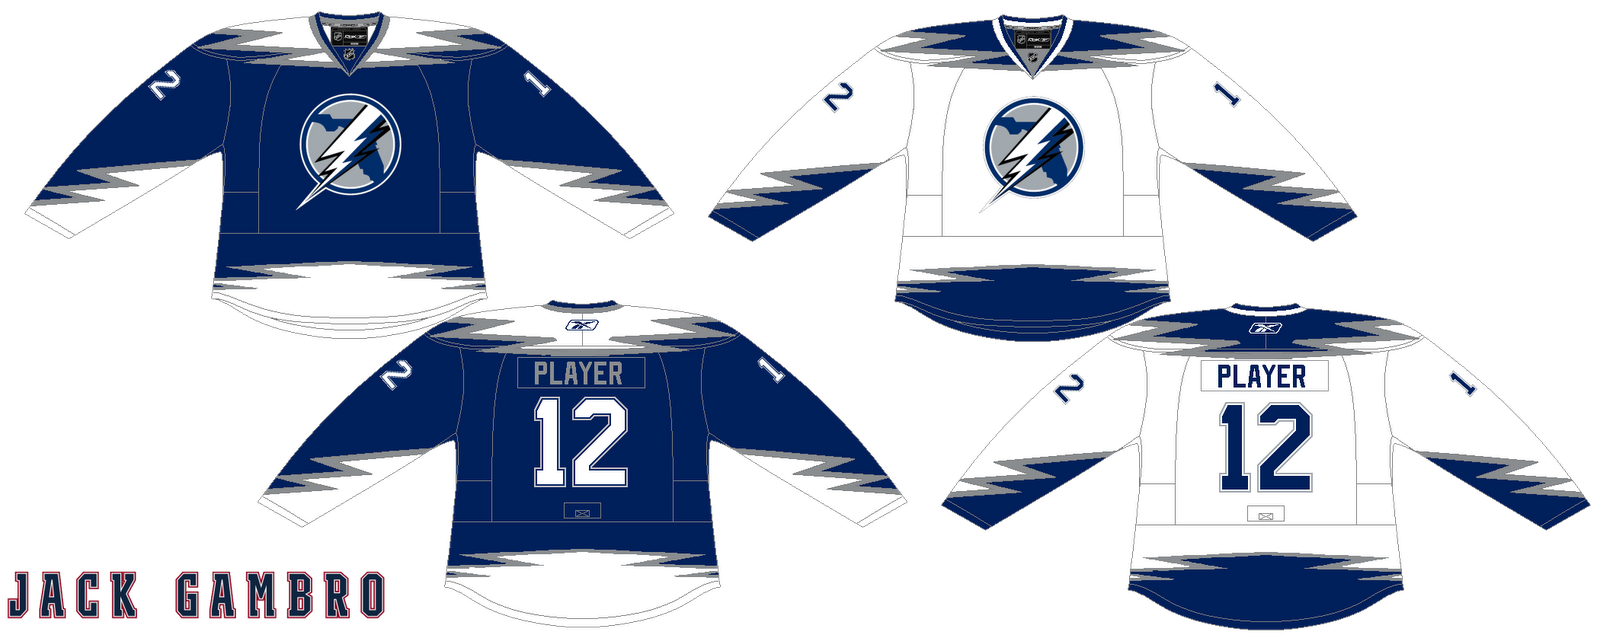 bolts225.png